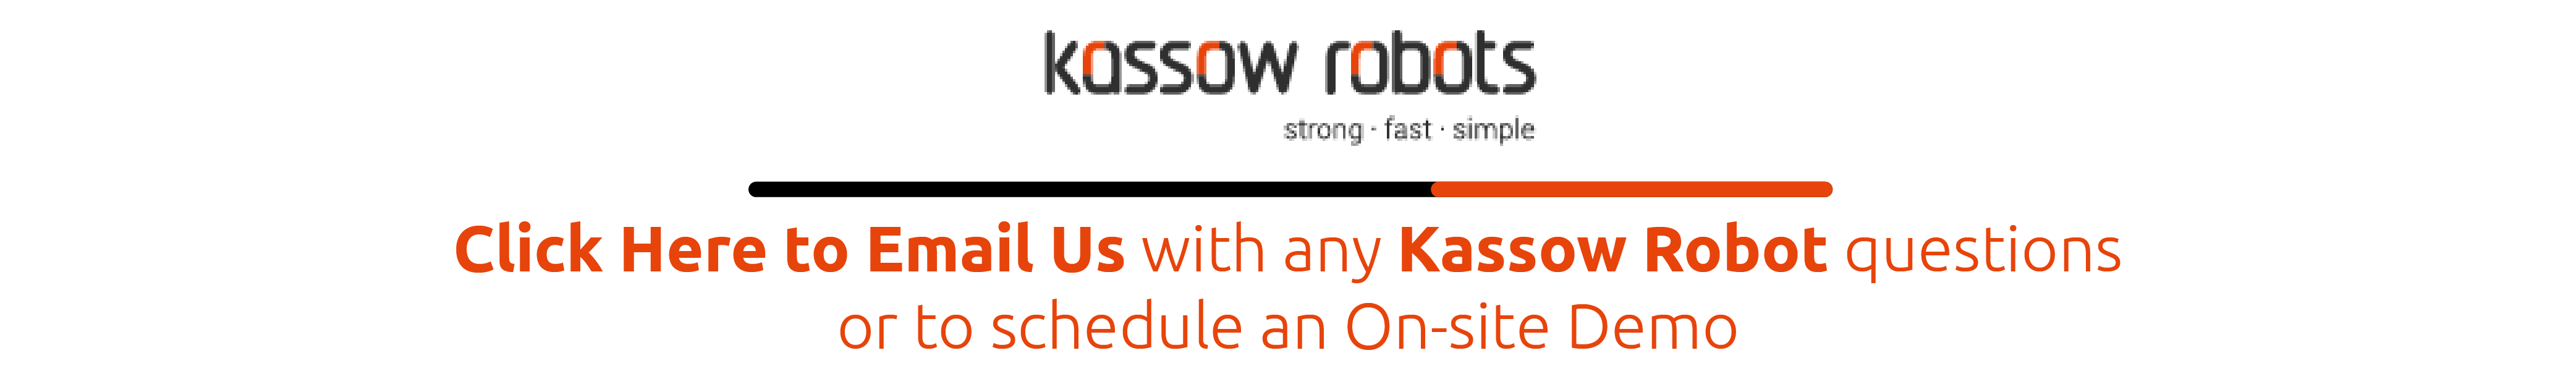 Email Scott Equipment Company with any Kassow Robot Questions